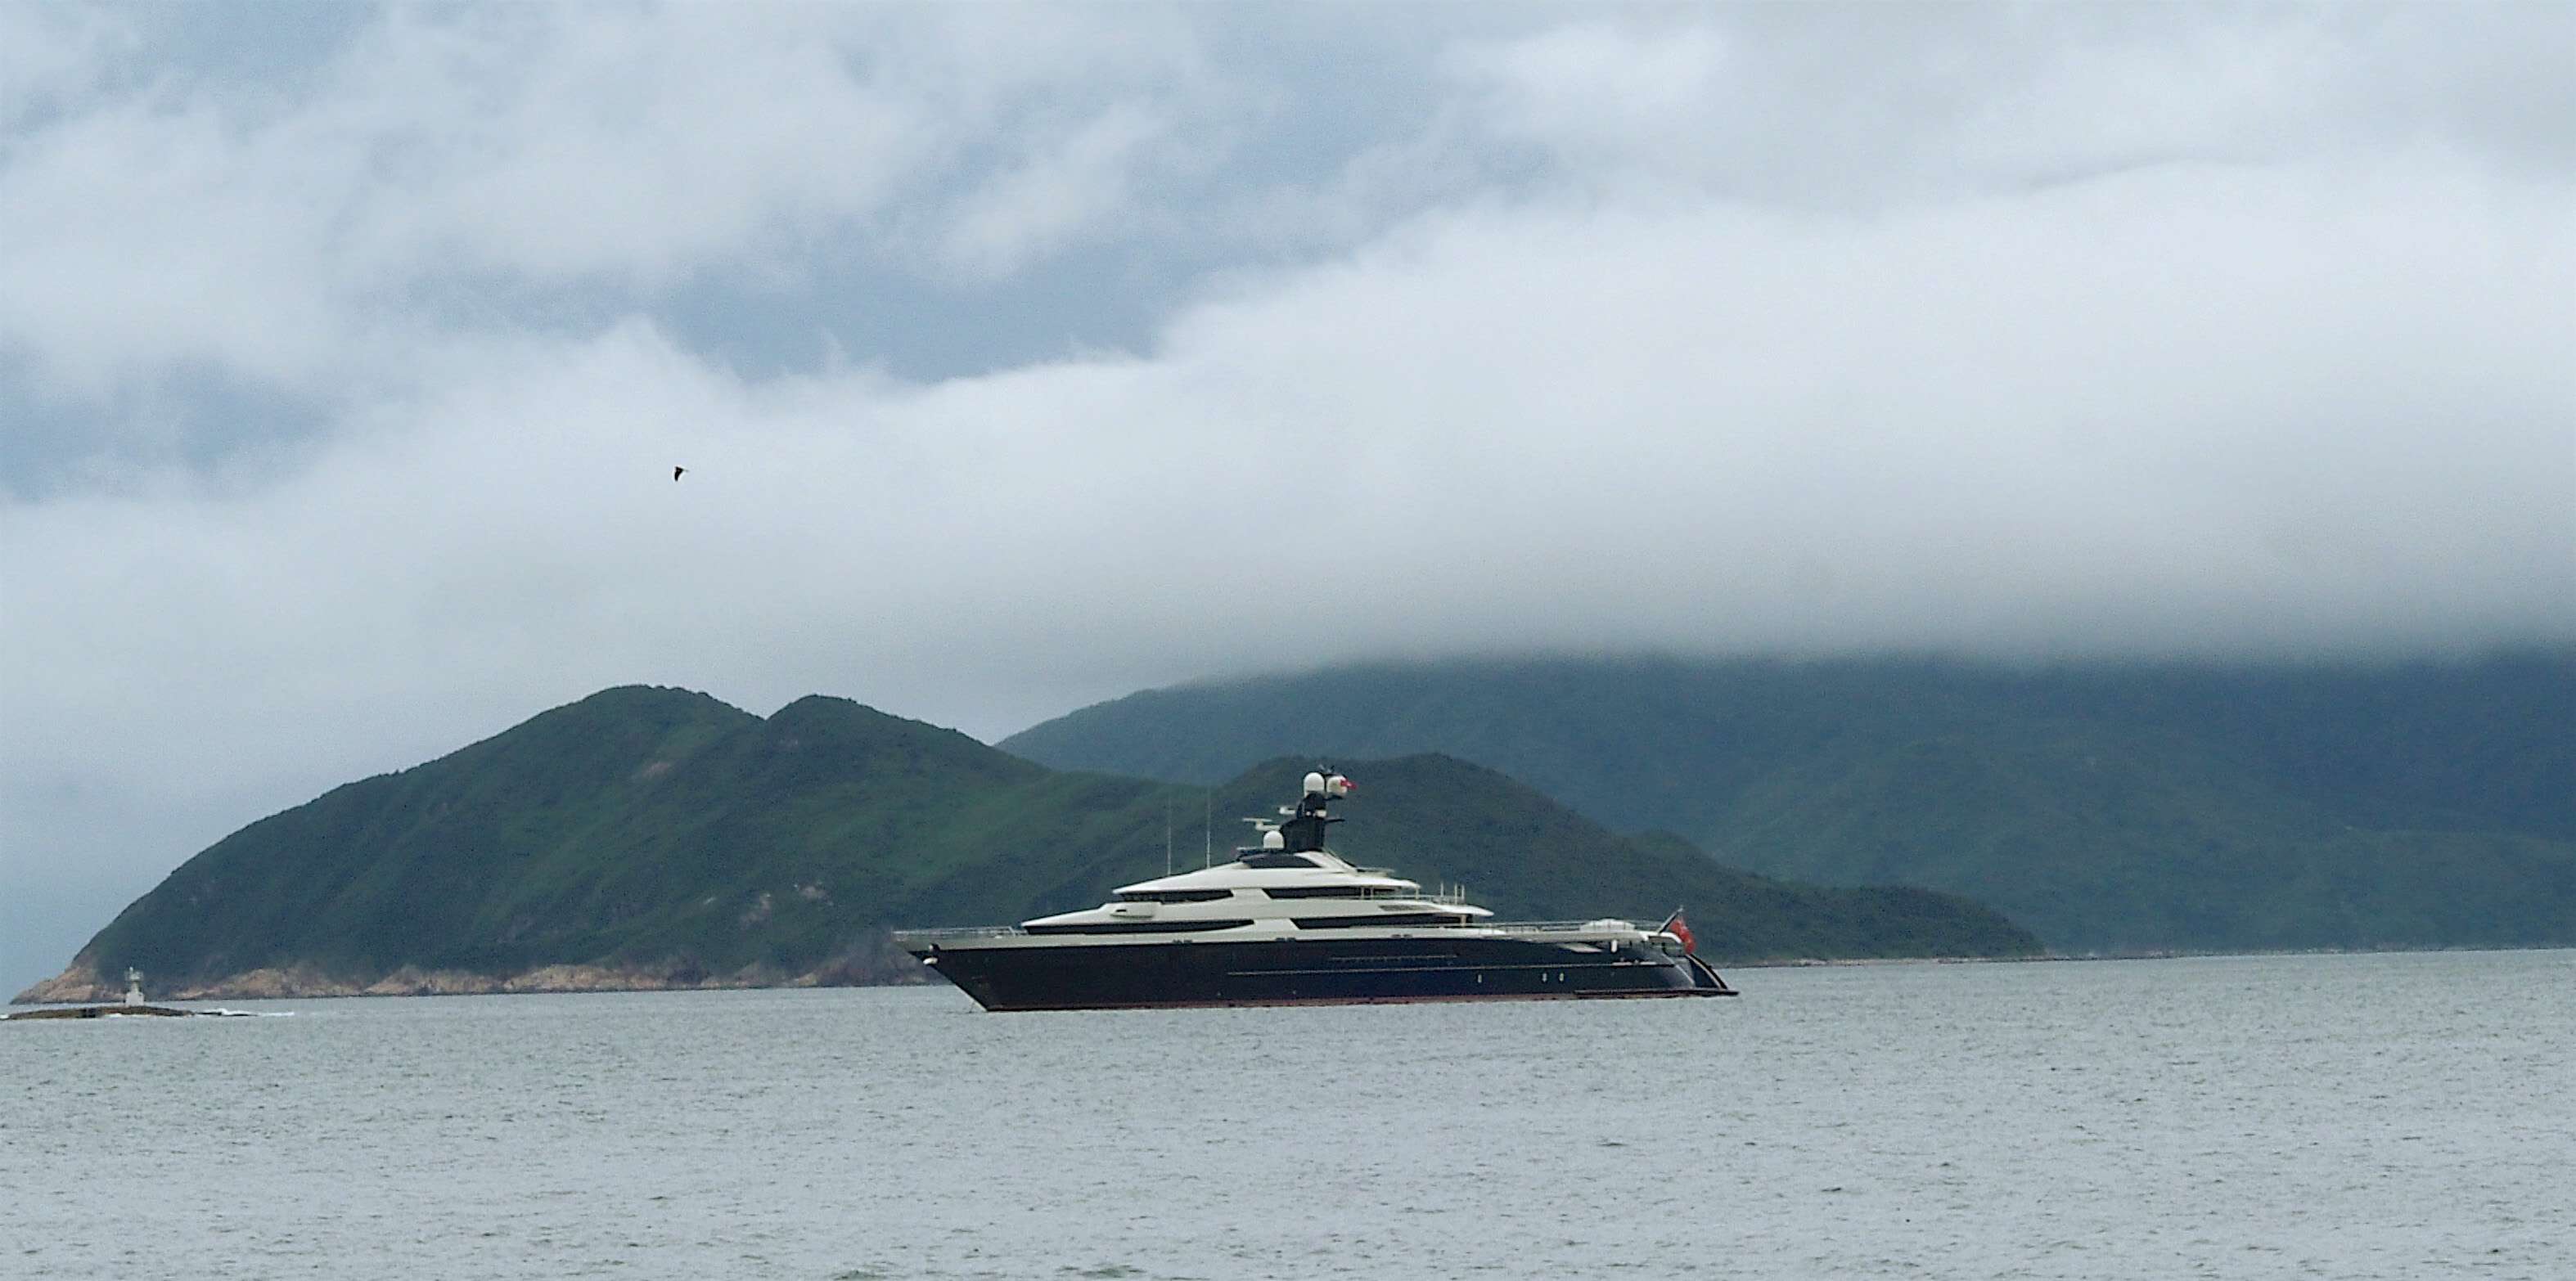 The Equanimity is spotted in waters near Sai Kung, Hong Kong. Photo: Howard Winn